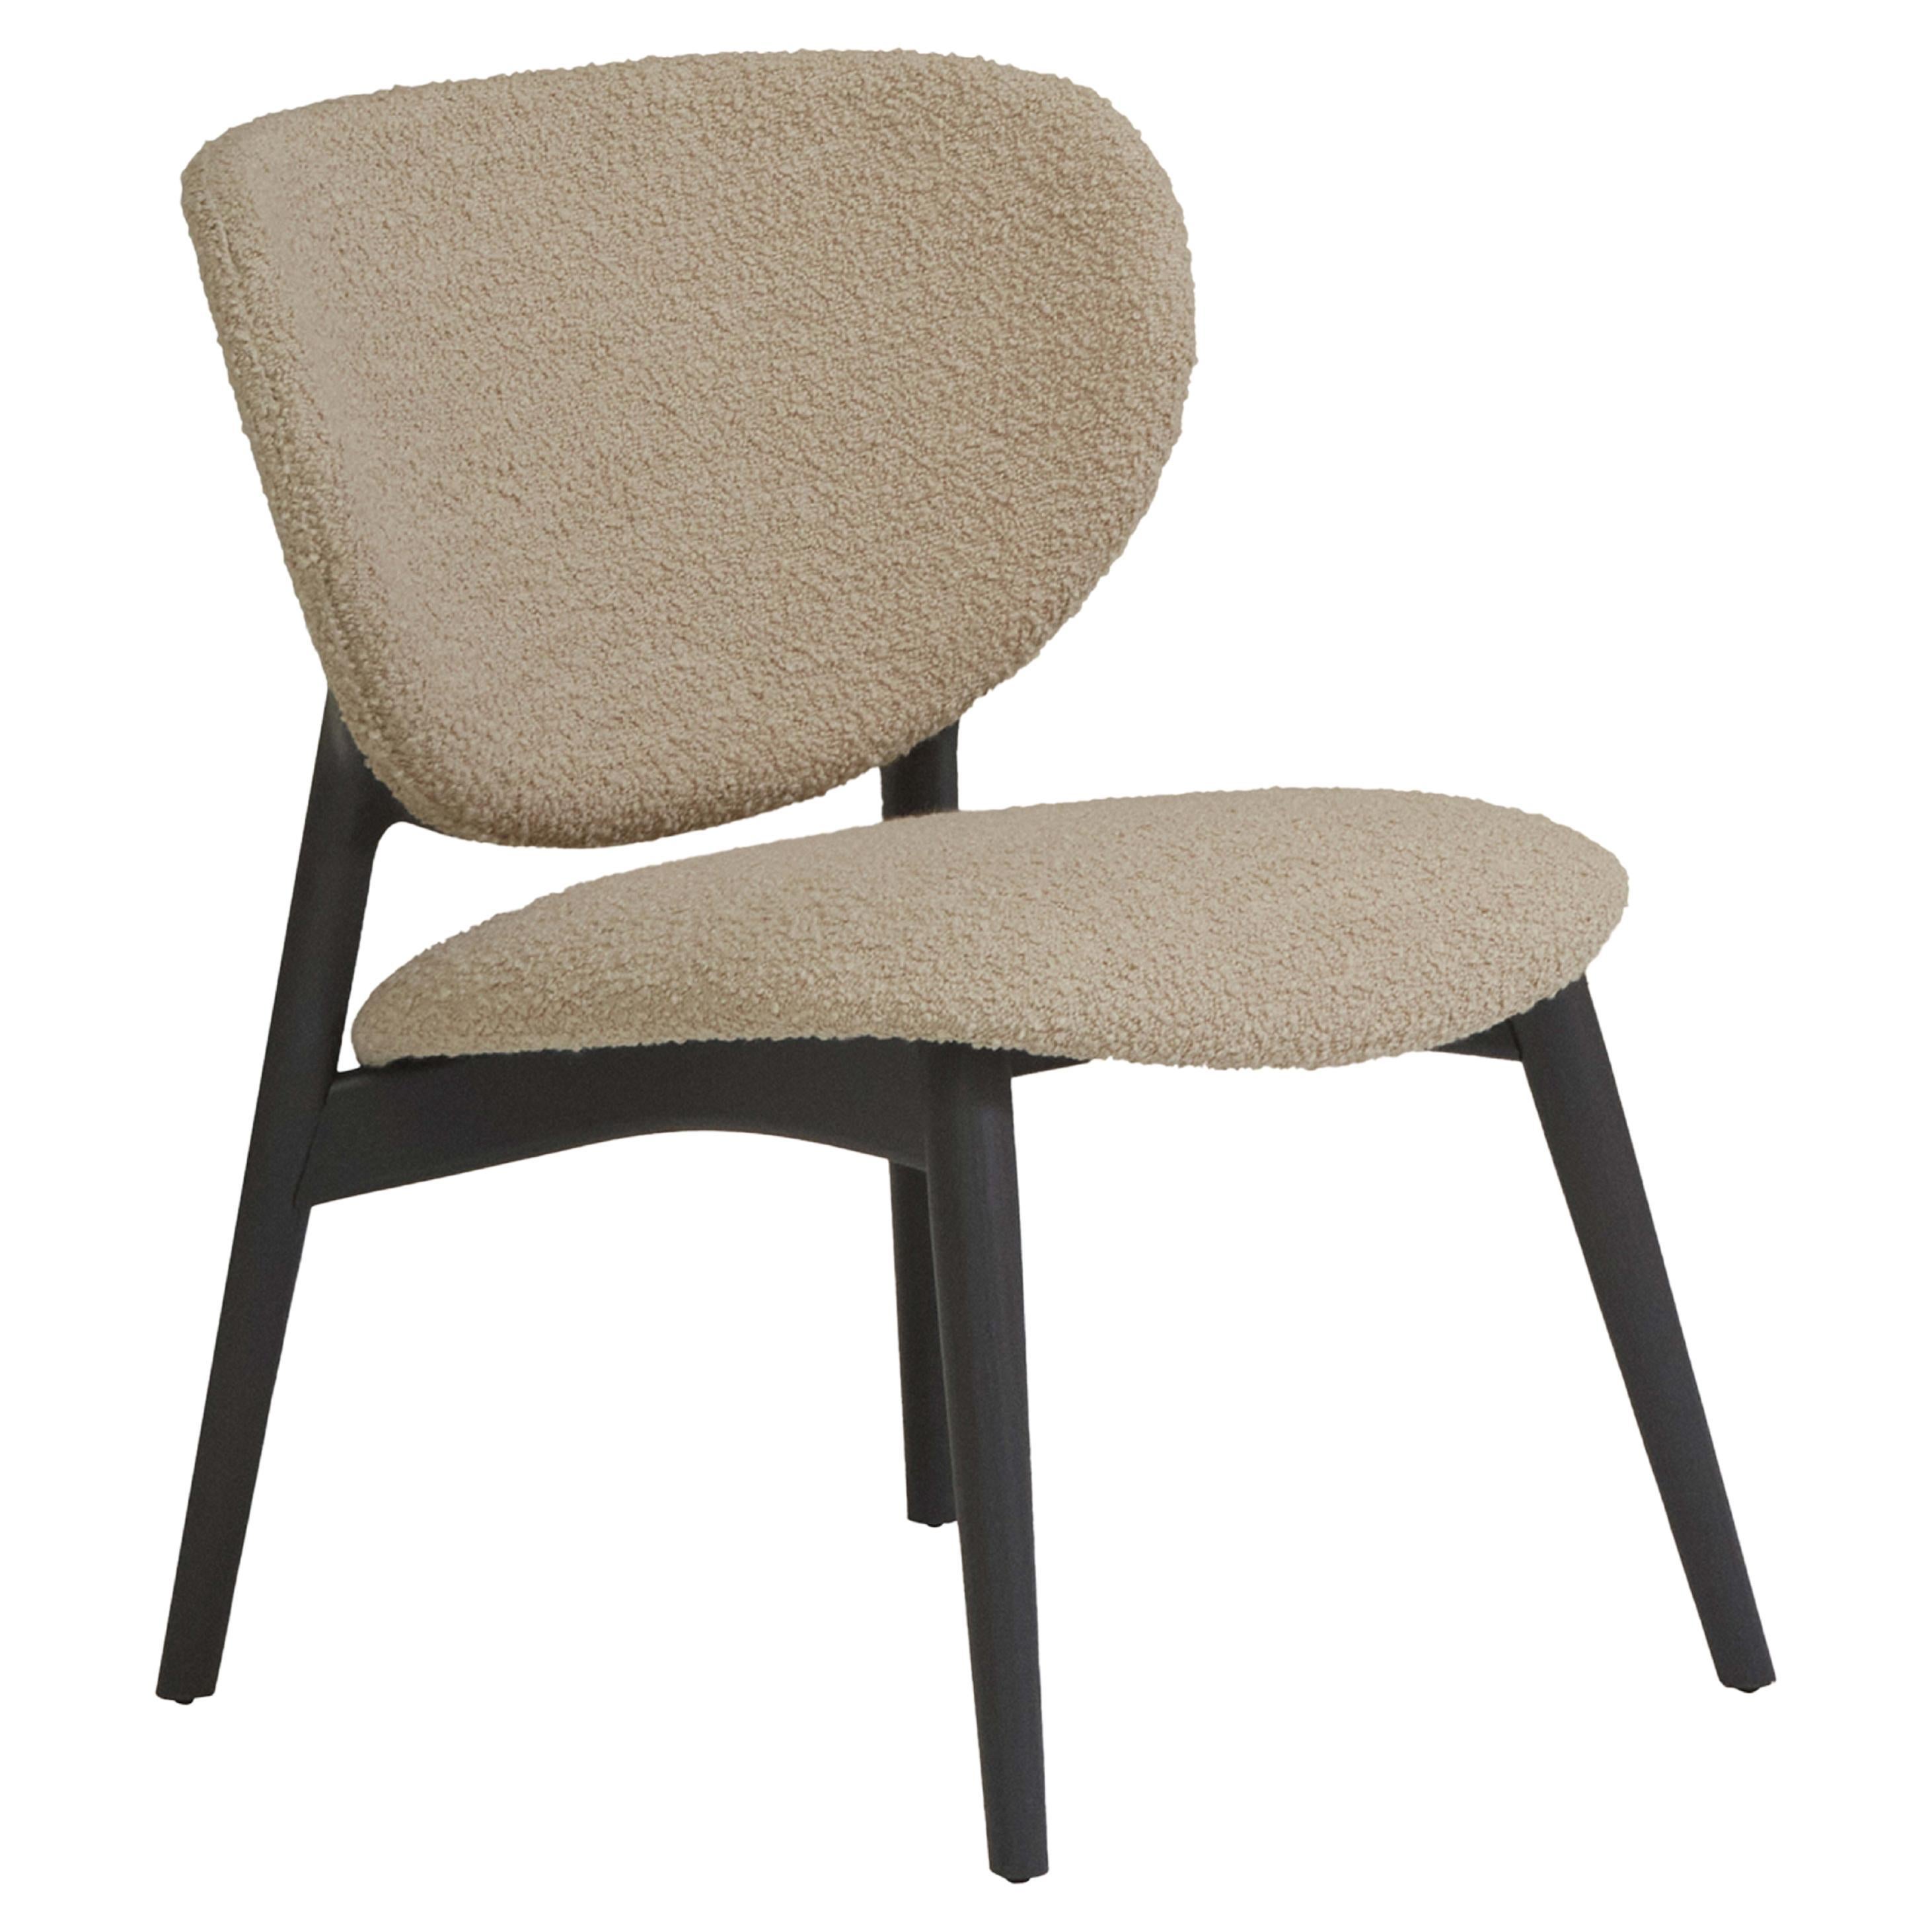 Fleuron 203 Anthracite & Beige Lounge Chair by Constance Guisset